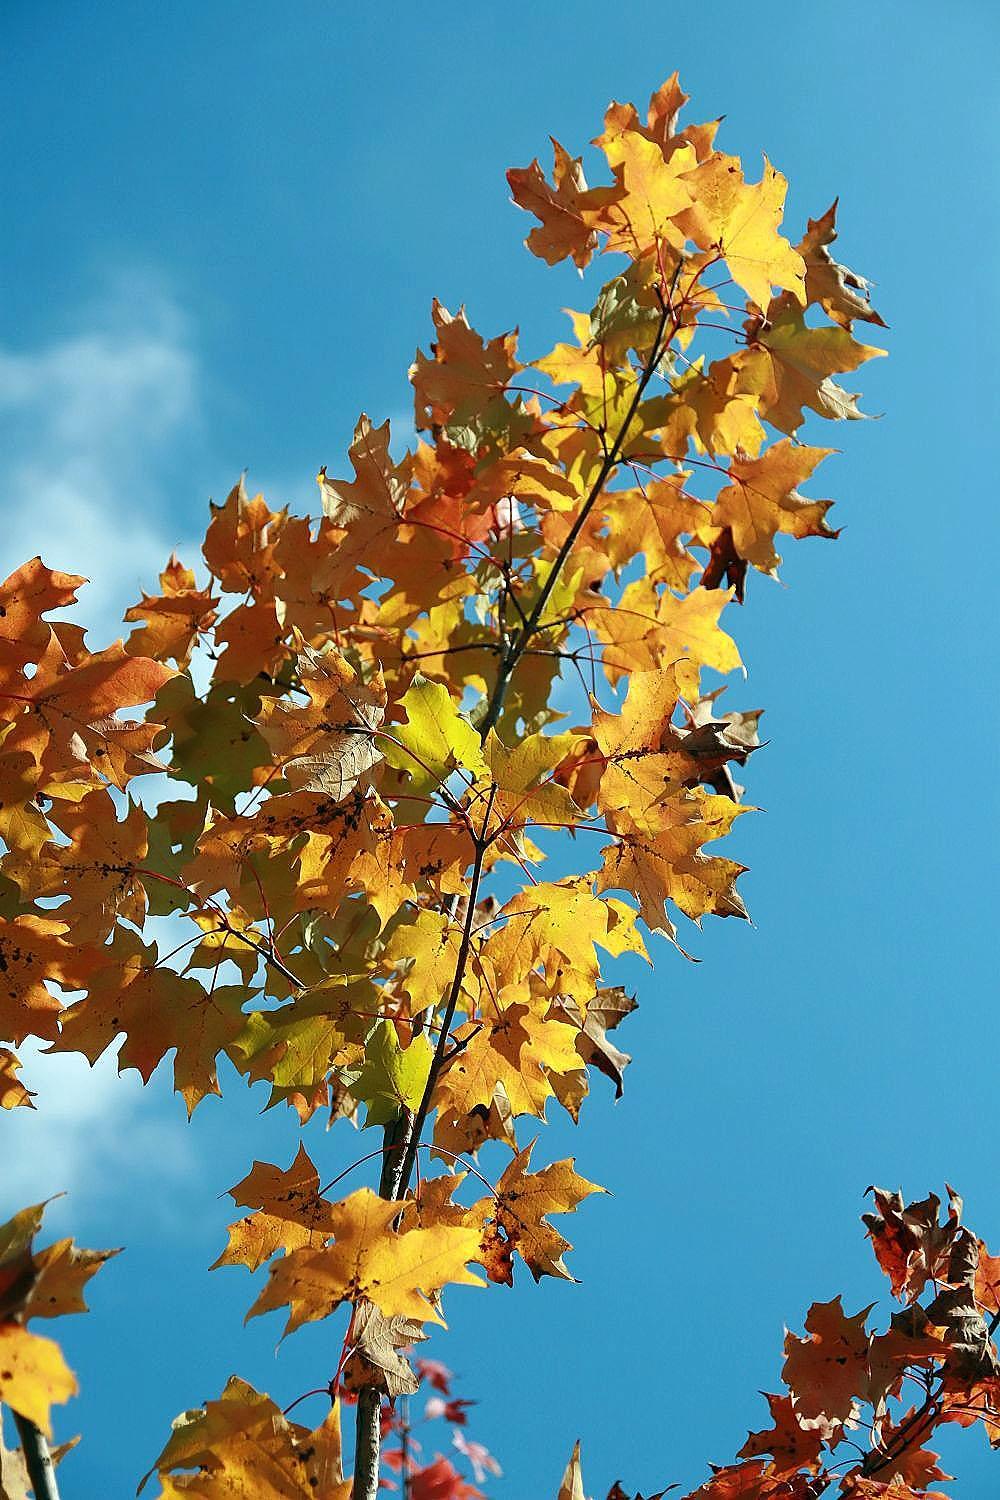 orange-yellow leaves with brown branches